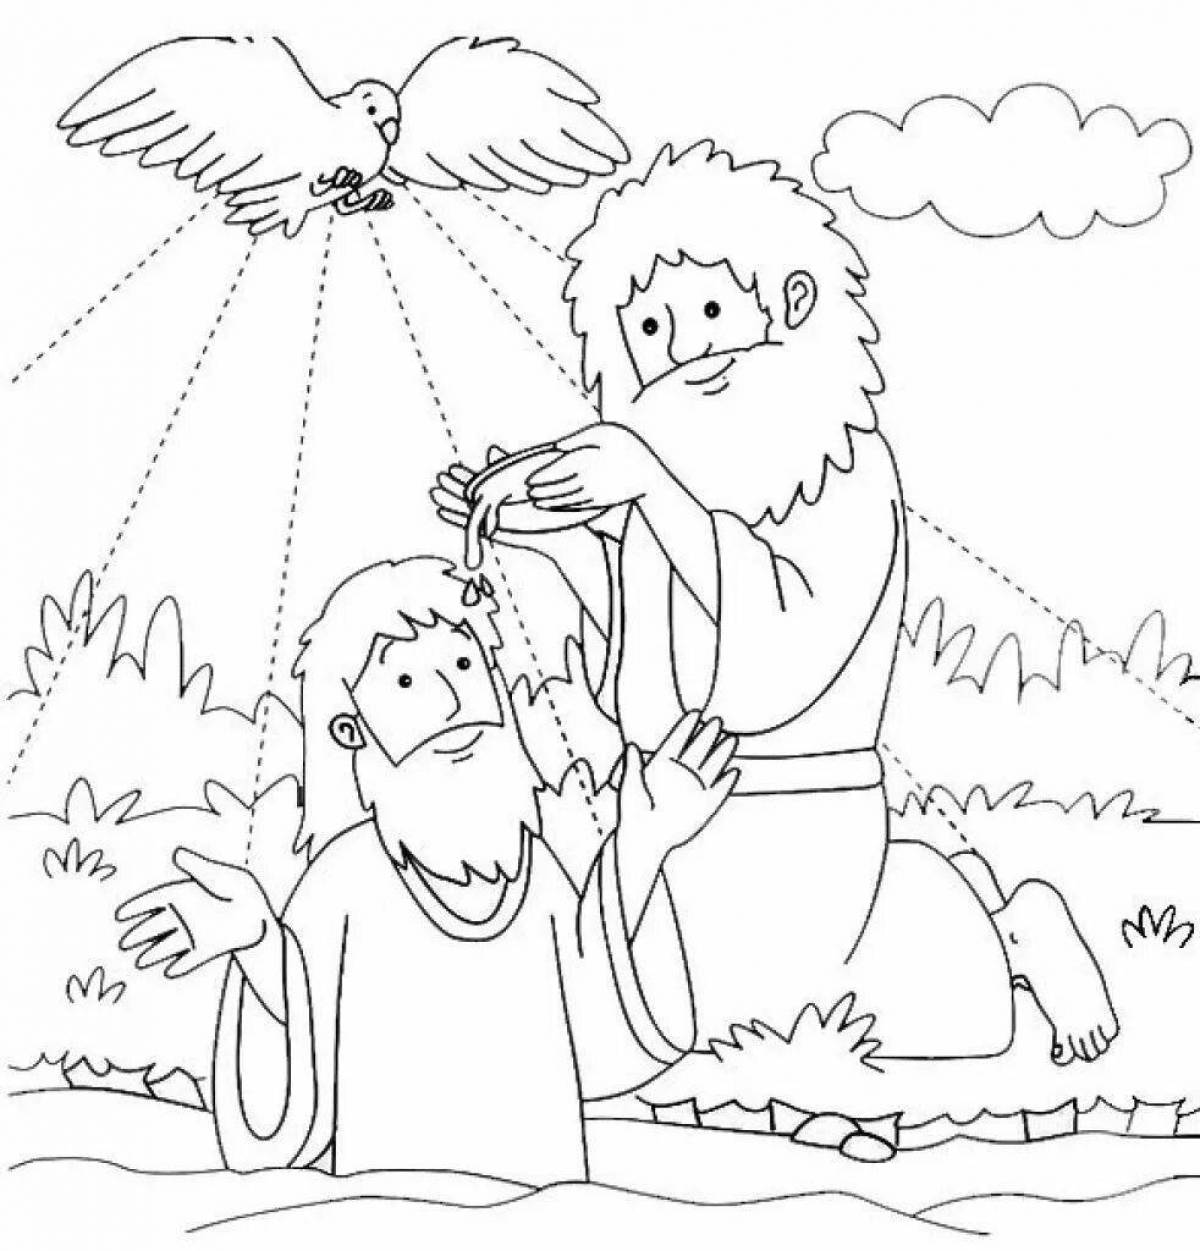 Children's baptism of jesus colorful coloring book